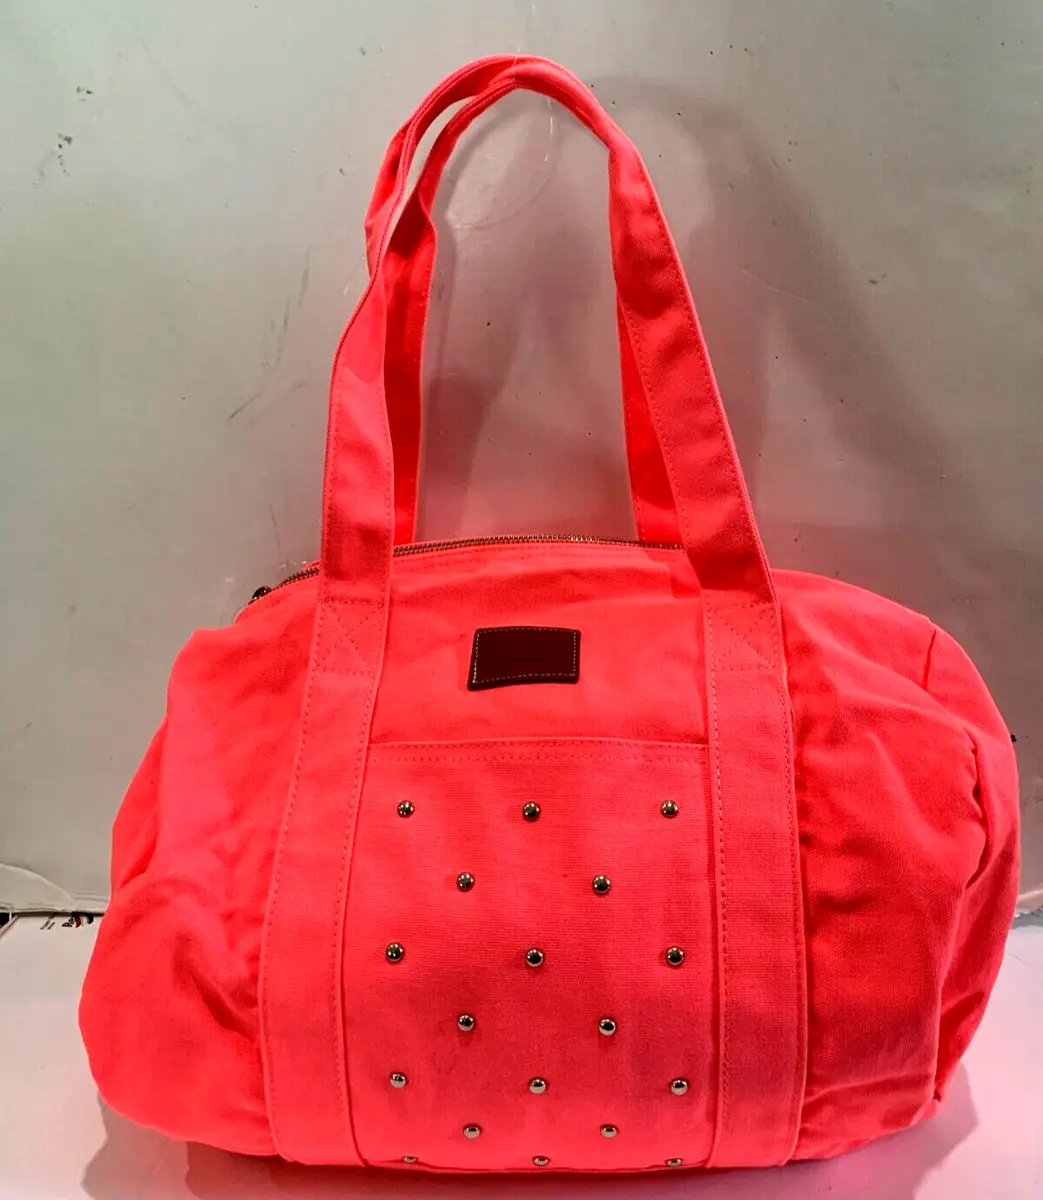 Victoria's Secret Red Bag Purse With Zip Closure Studded New With Tags